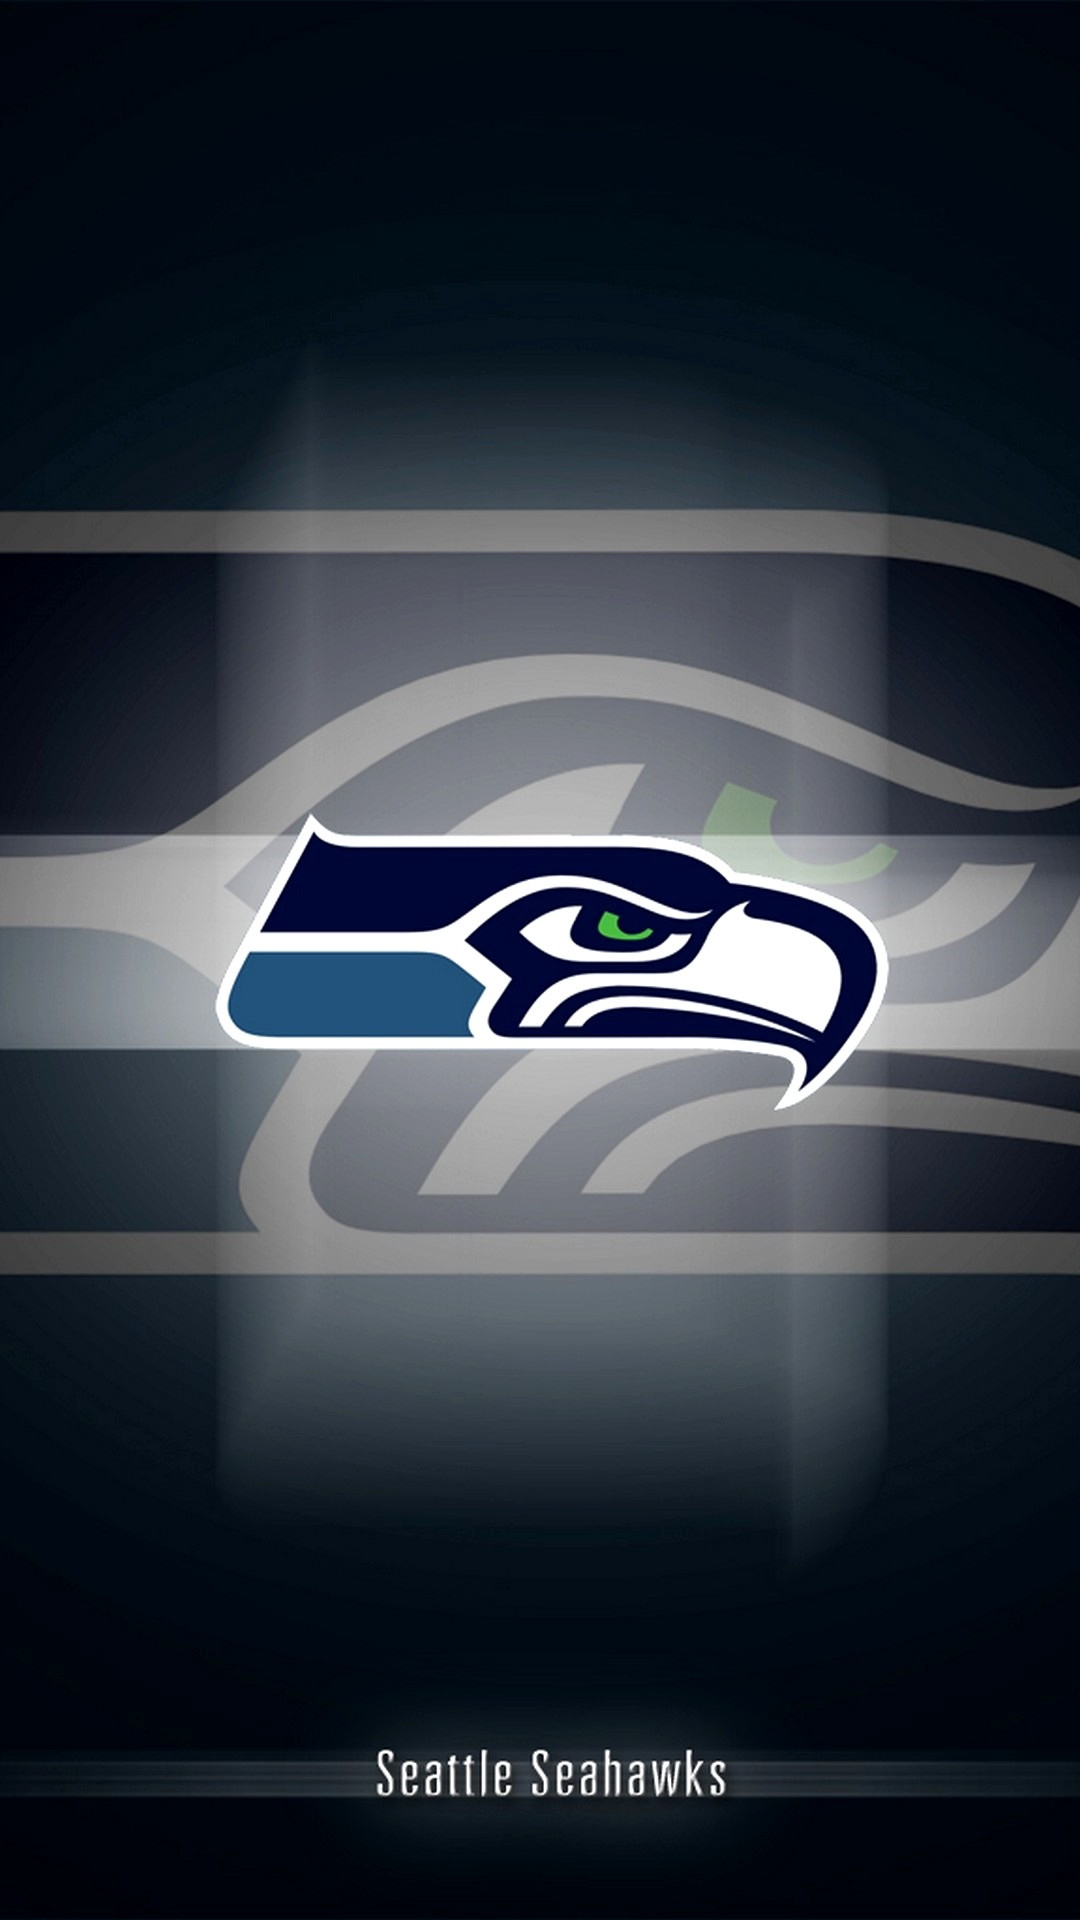 Seattle Seahawks Wallpaper Mobile with high-resolution 1080x1920 pixel. You can use and set as wallpaper for Notebook Screensavers, Mac Wallpapers, Mobile Home Screen, iPhone or Android Phones Lock Screen